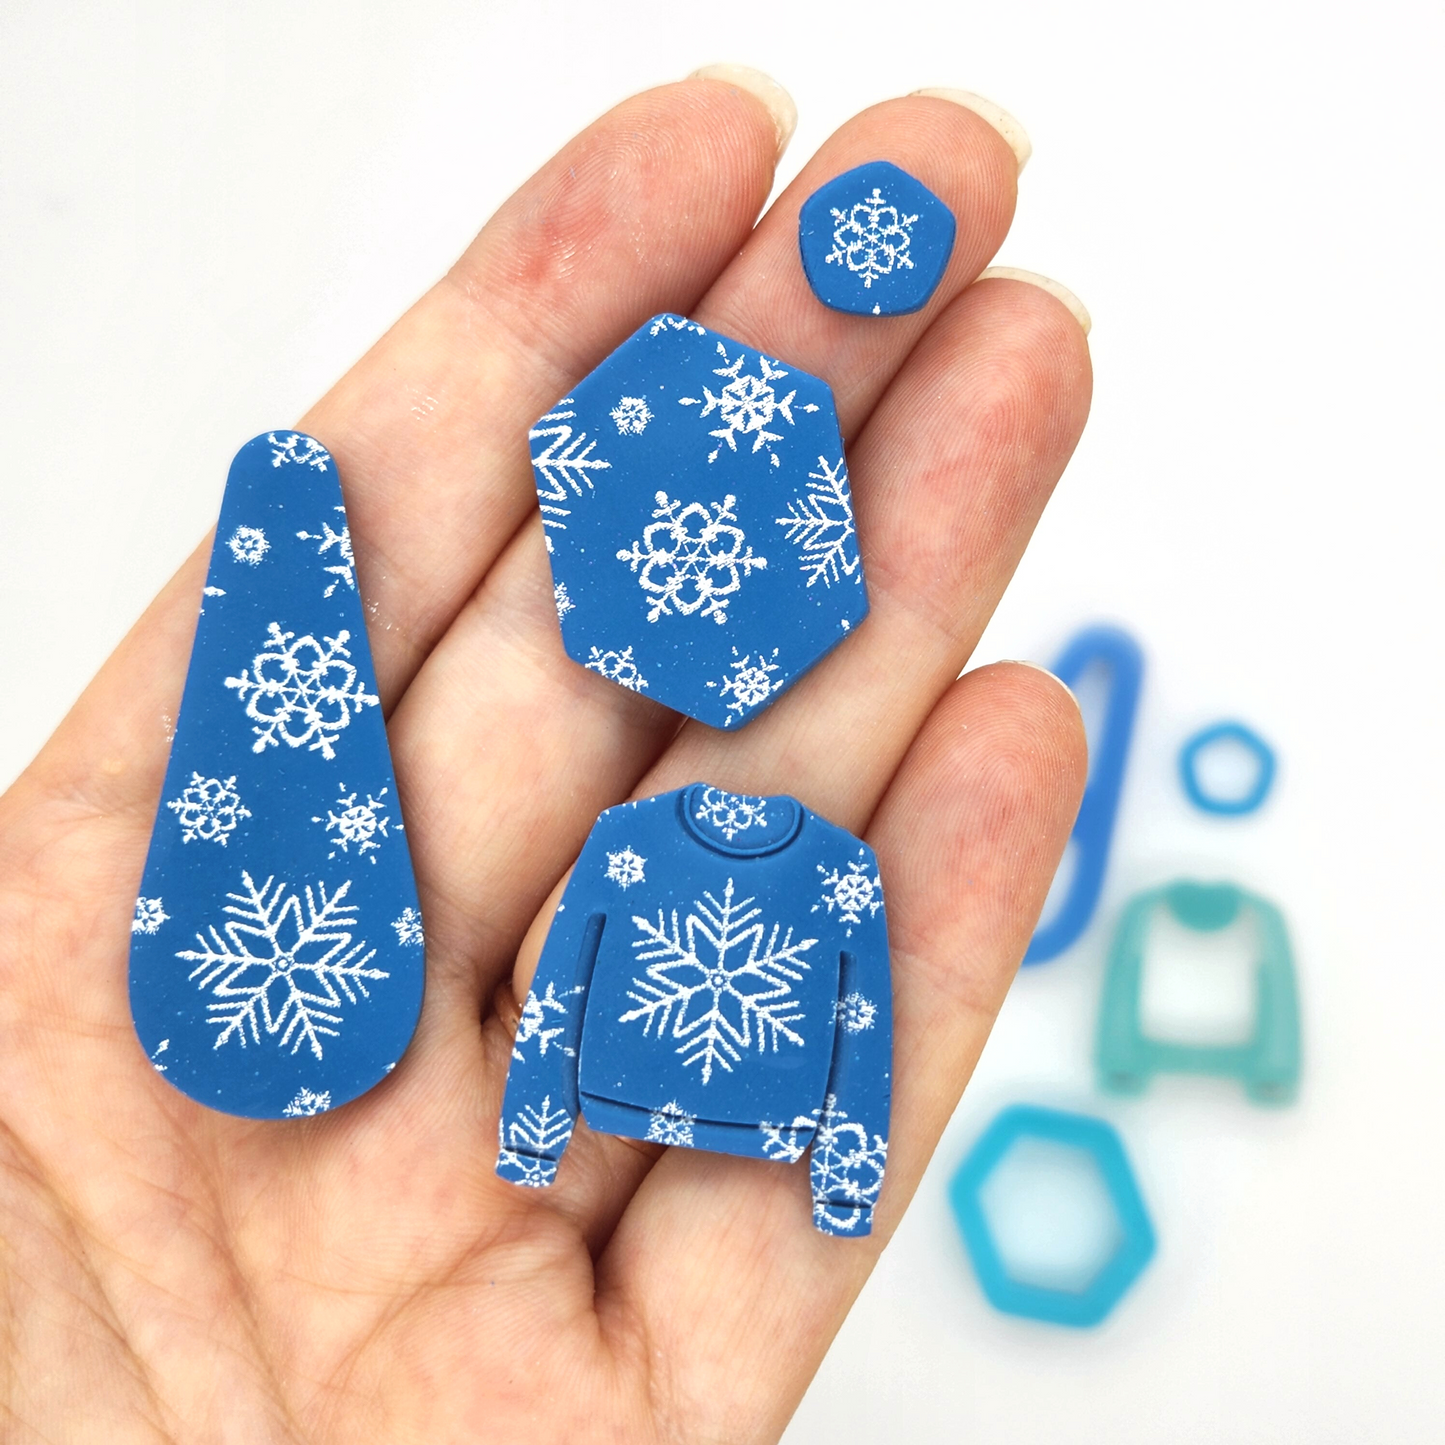 Winter Christmas Snowflake Design Clay Painting Silkscreen Stencil Polymer Clay Earrings Jewelry Charm Ornament Crafts